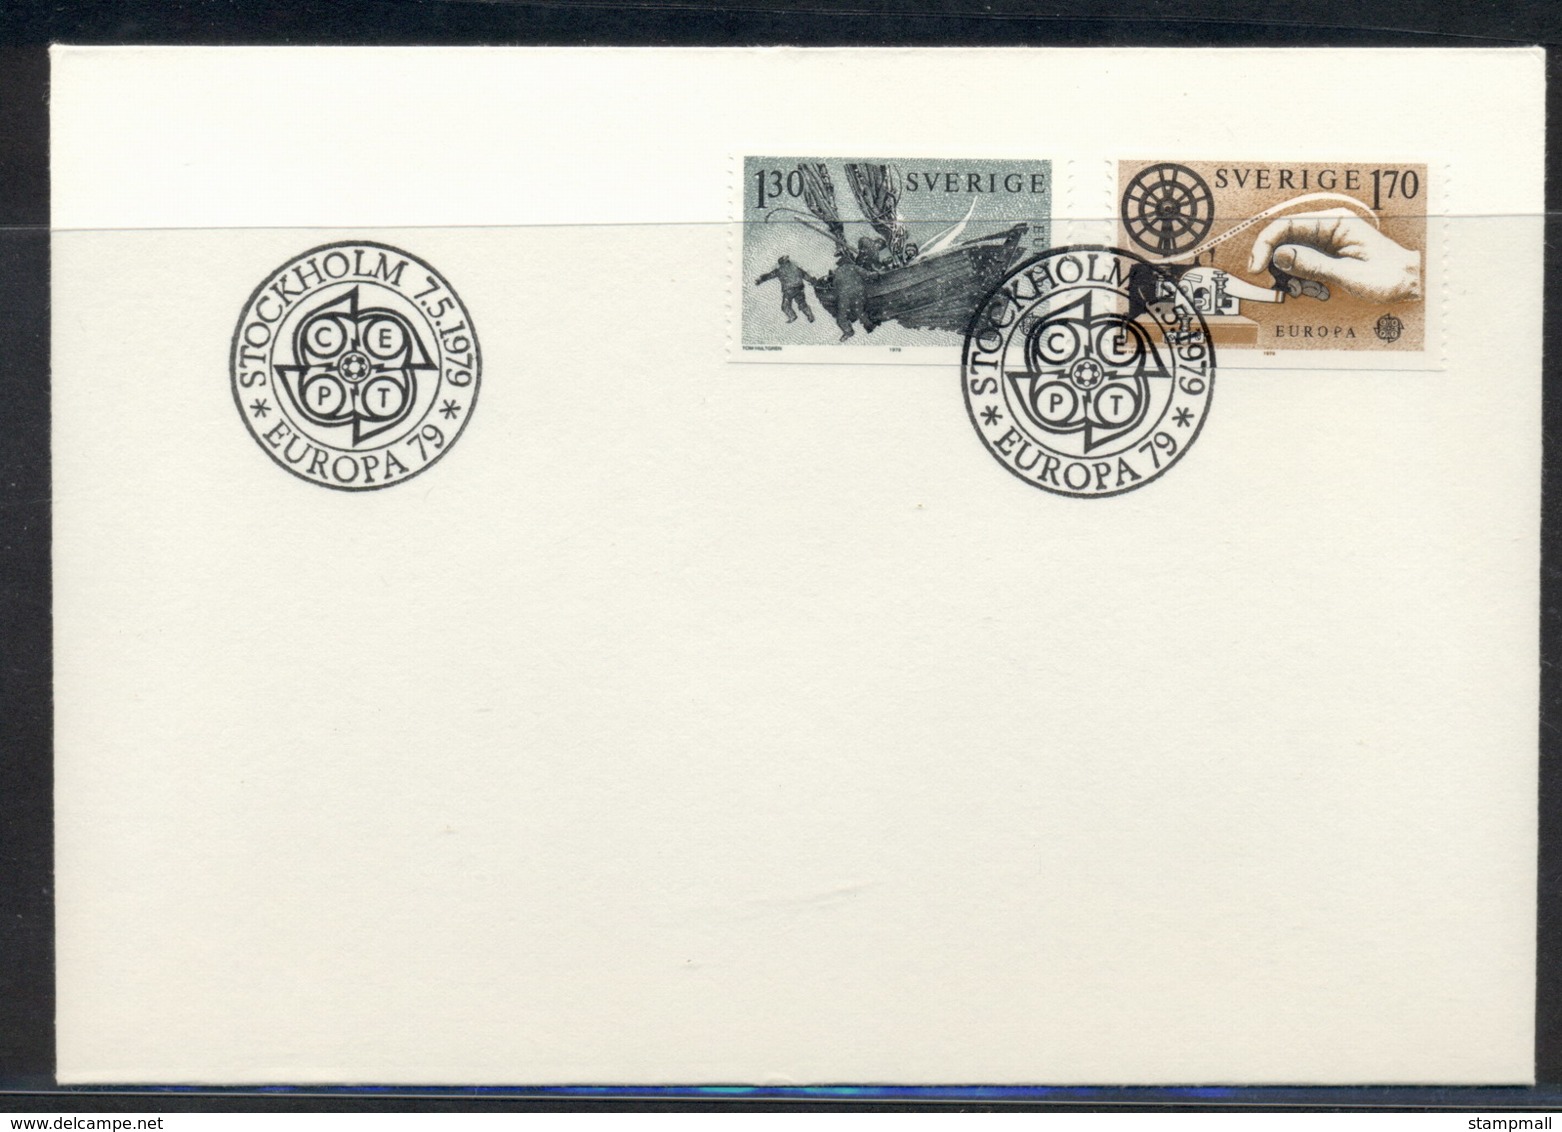 Sweden 1979 Europa Communications FDC - FDC